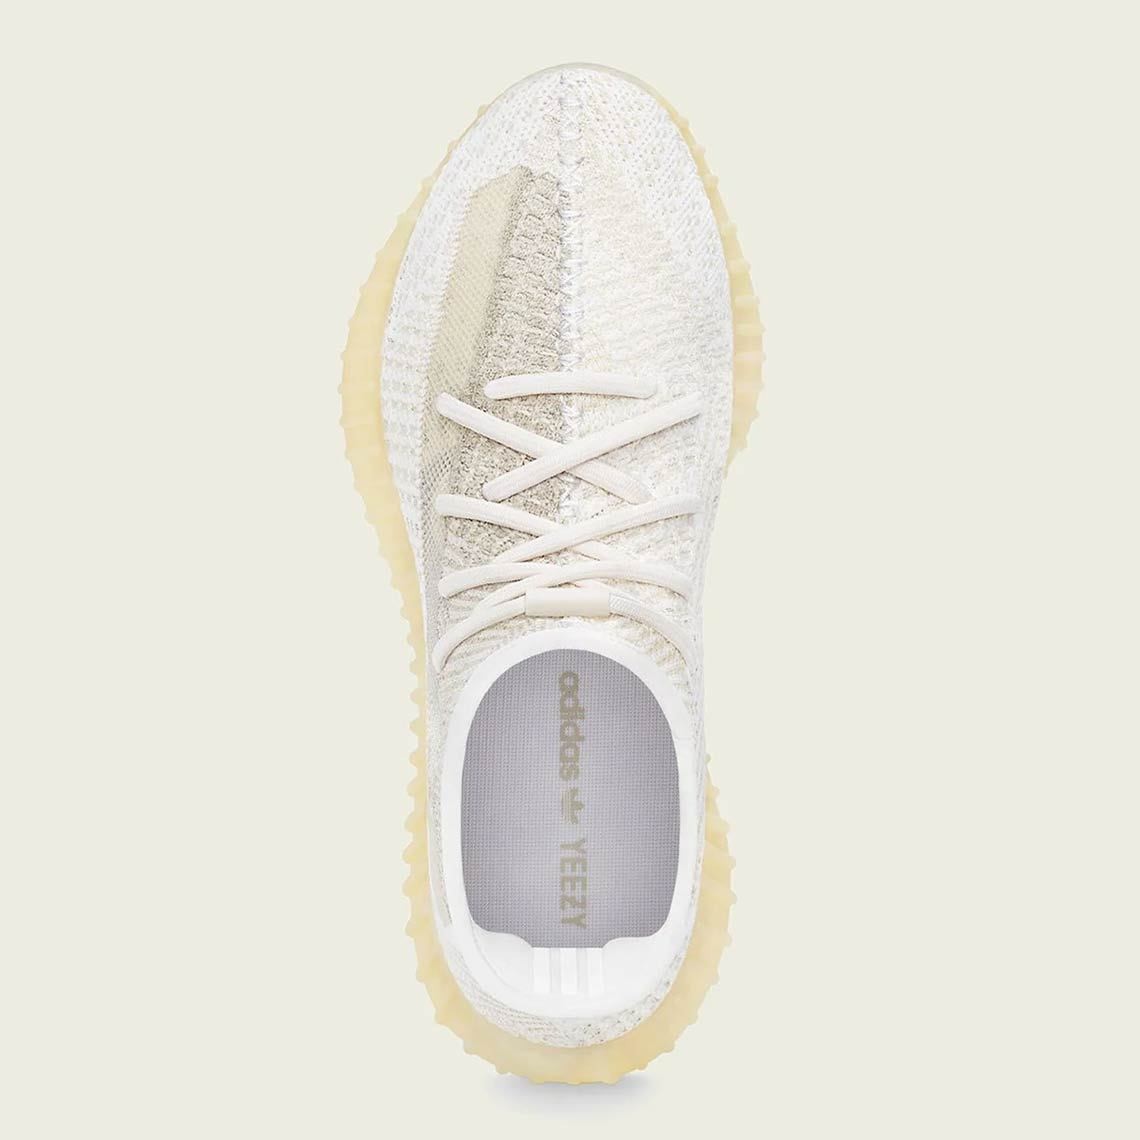 adidas YEEZY BOOST 350 V2 “Natural”